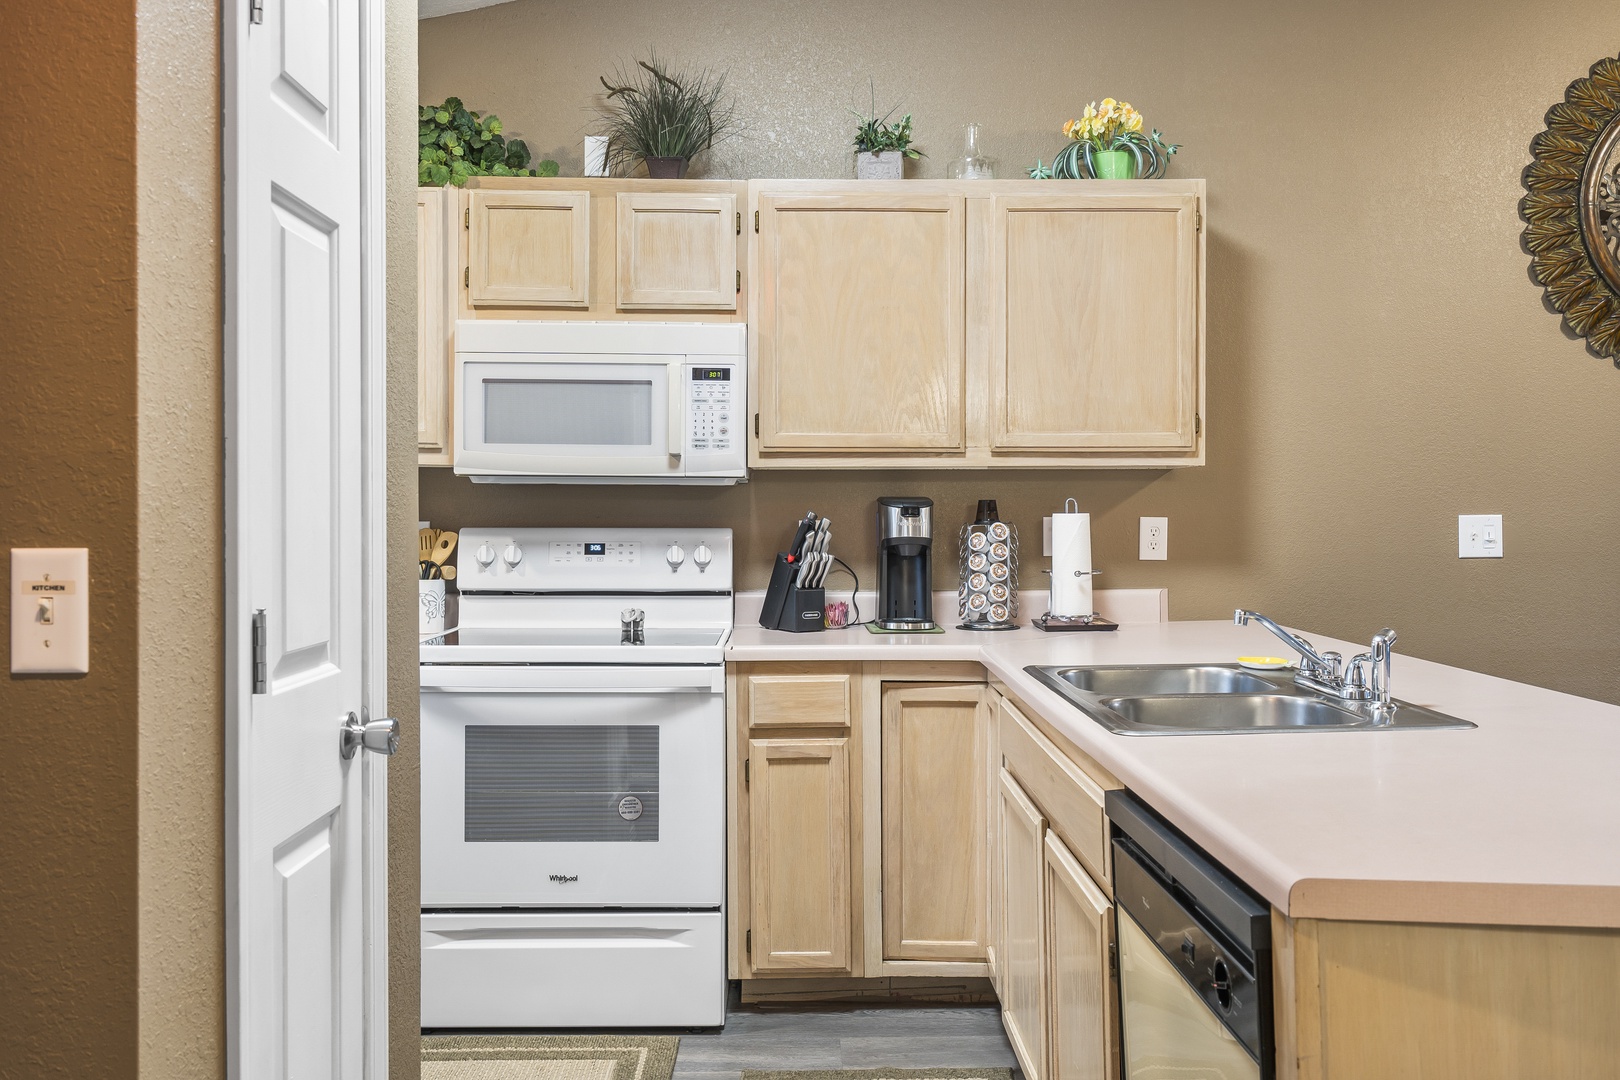 The open kitchen offers ample space & all the comforts of home